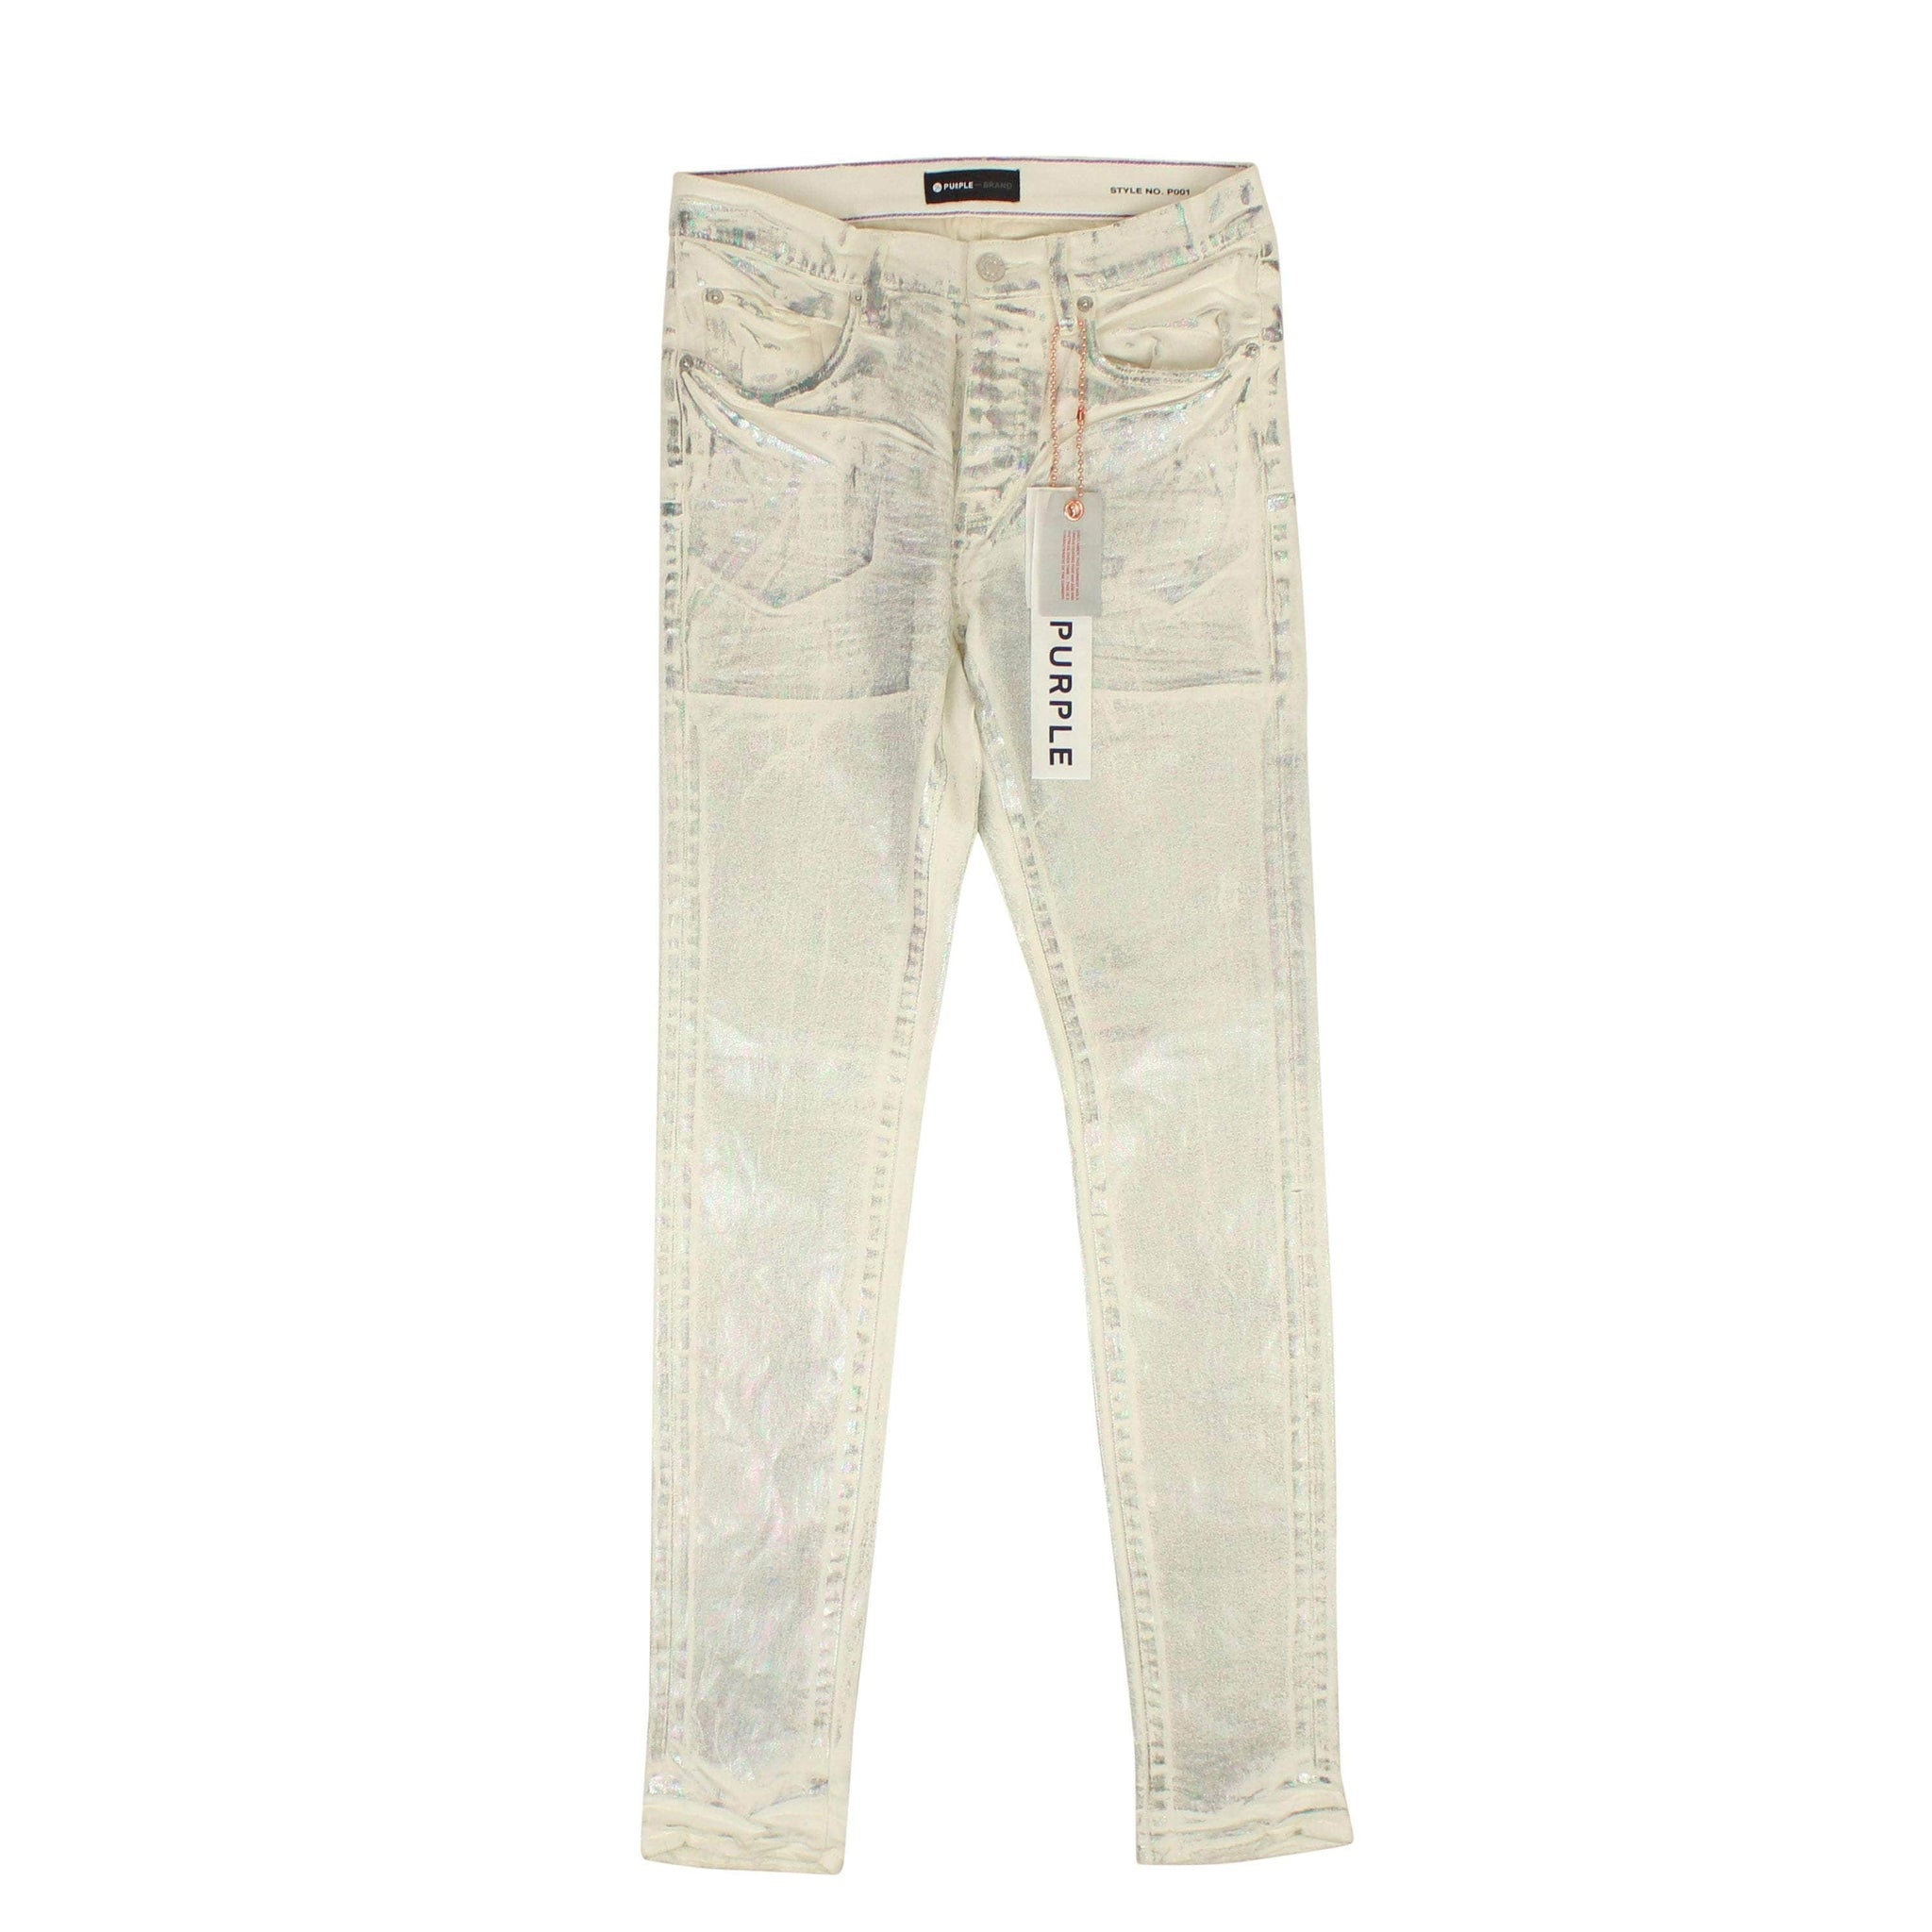 White WHITE X RAY IRIDESCENT WAVE FOIL Jeans - GBNY